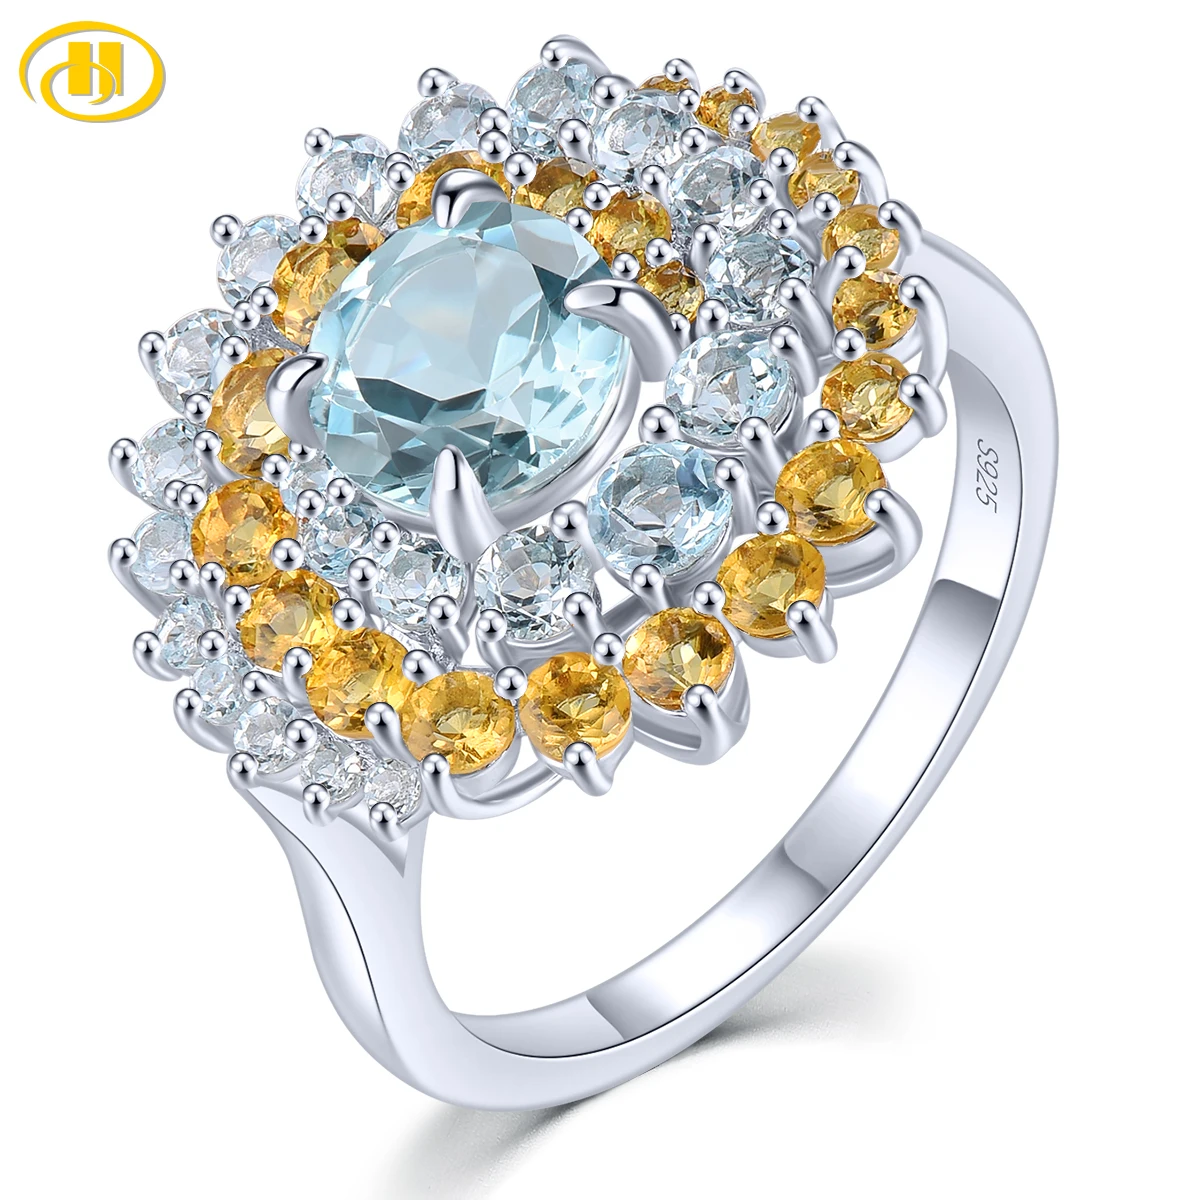 

Natural Sky Blue Topaz Sterling Silver Rings 2.8 Carats Genuine Citrine Topaz Multicolor Design Women's Romantic Birthday Gifts